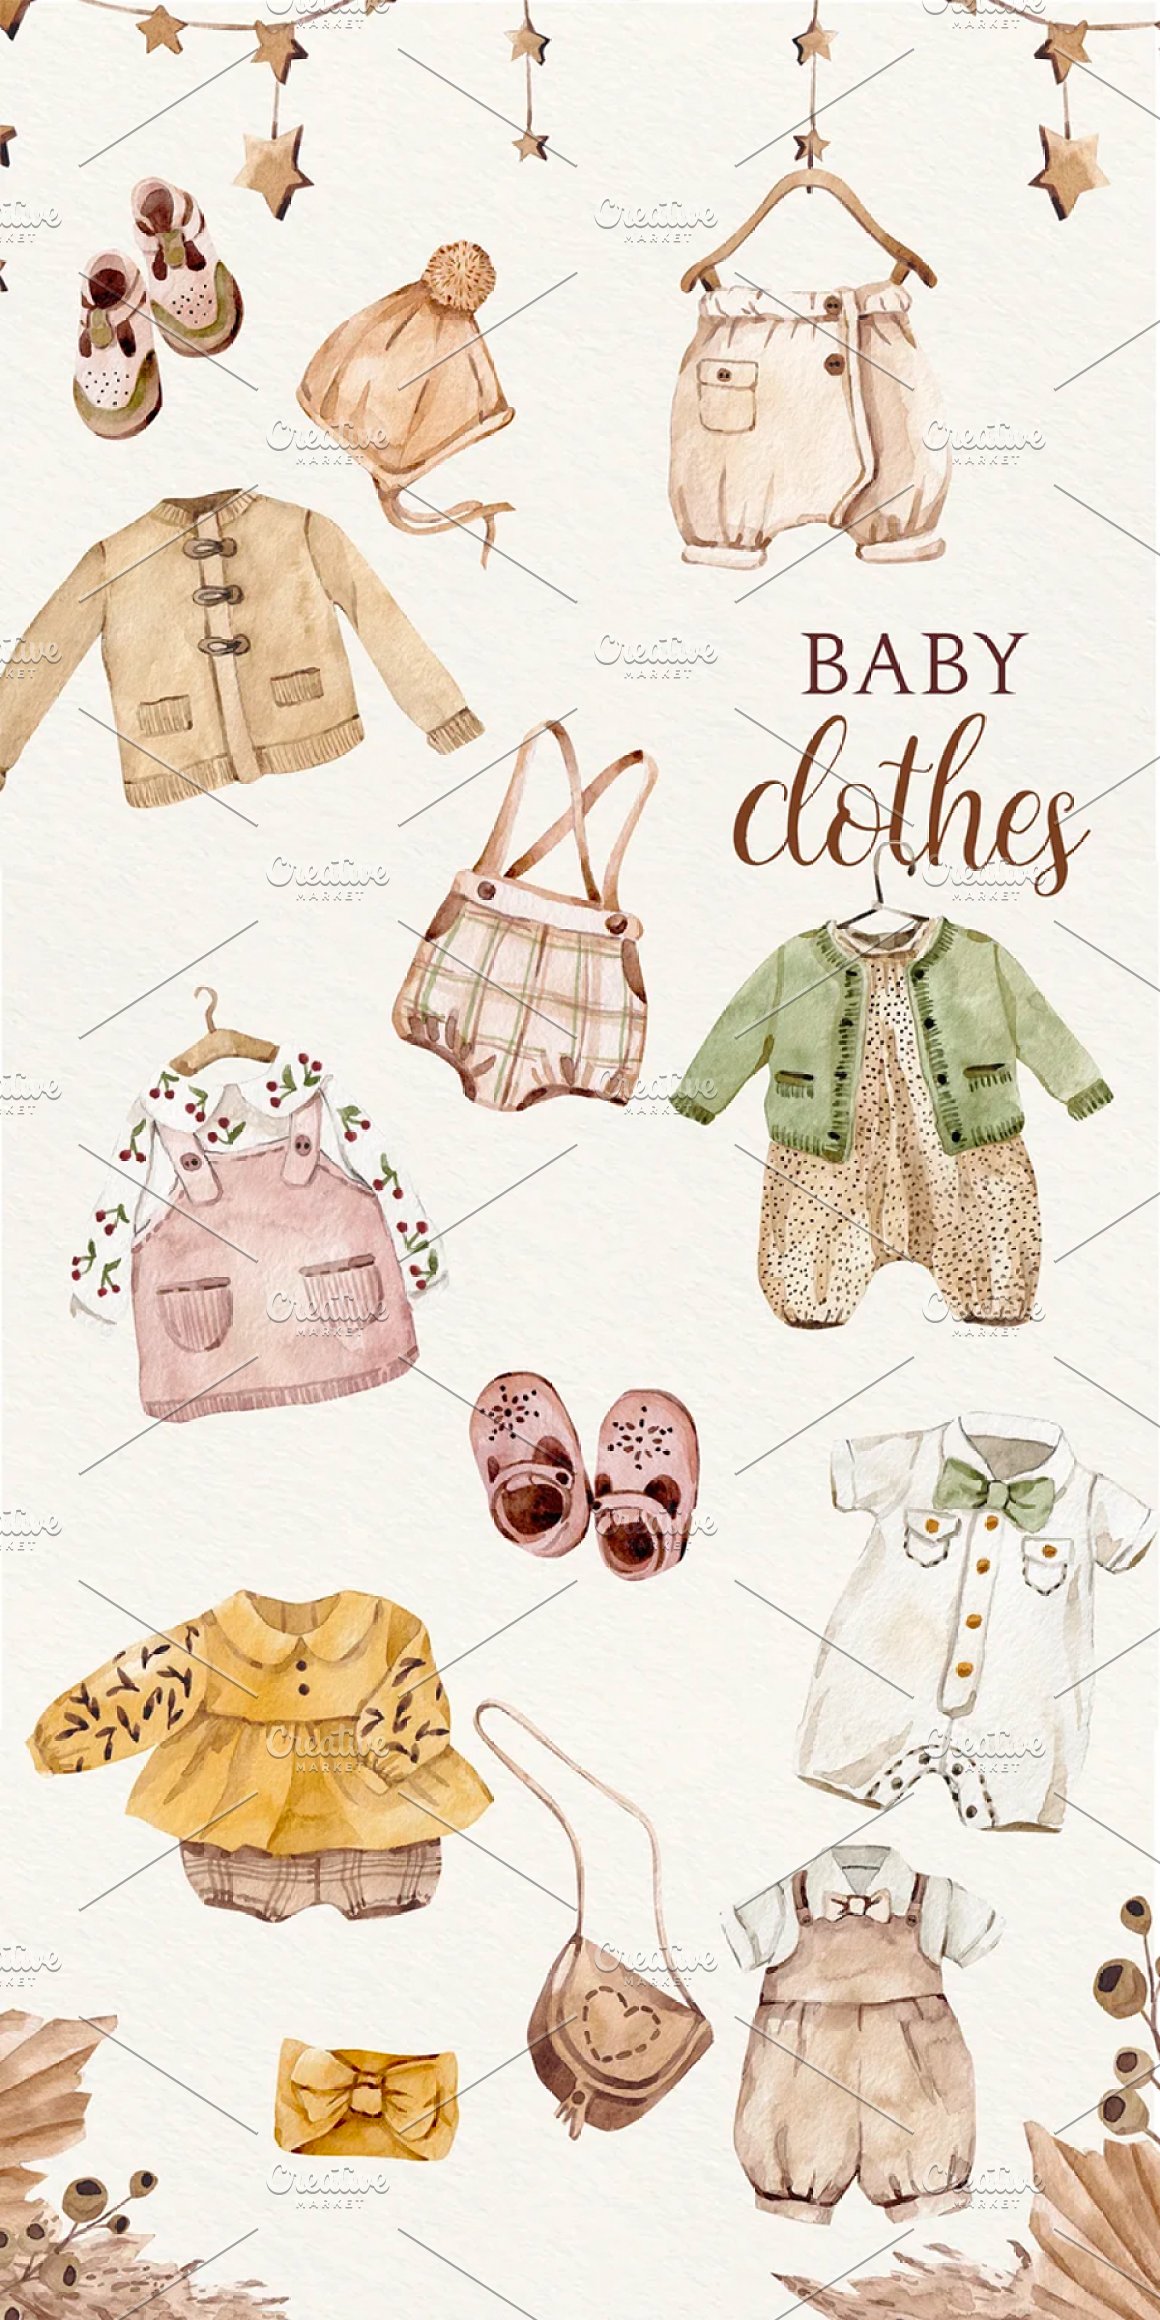 Stylish watercolor baby clothes.